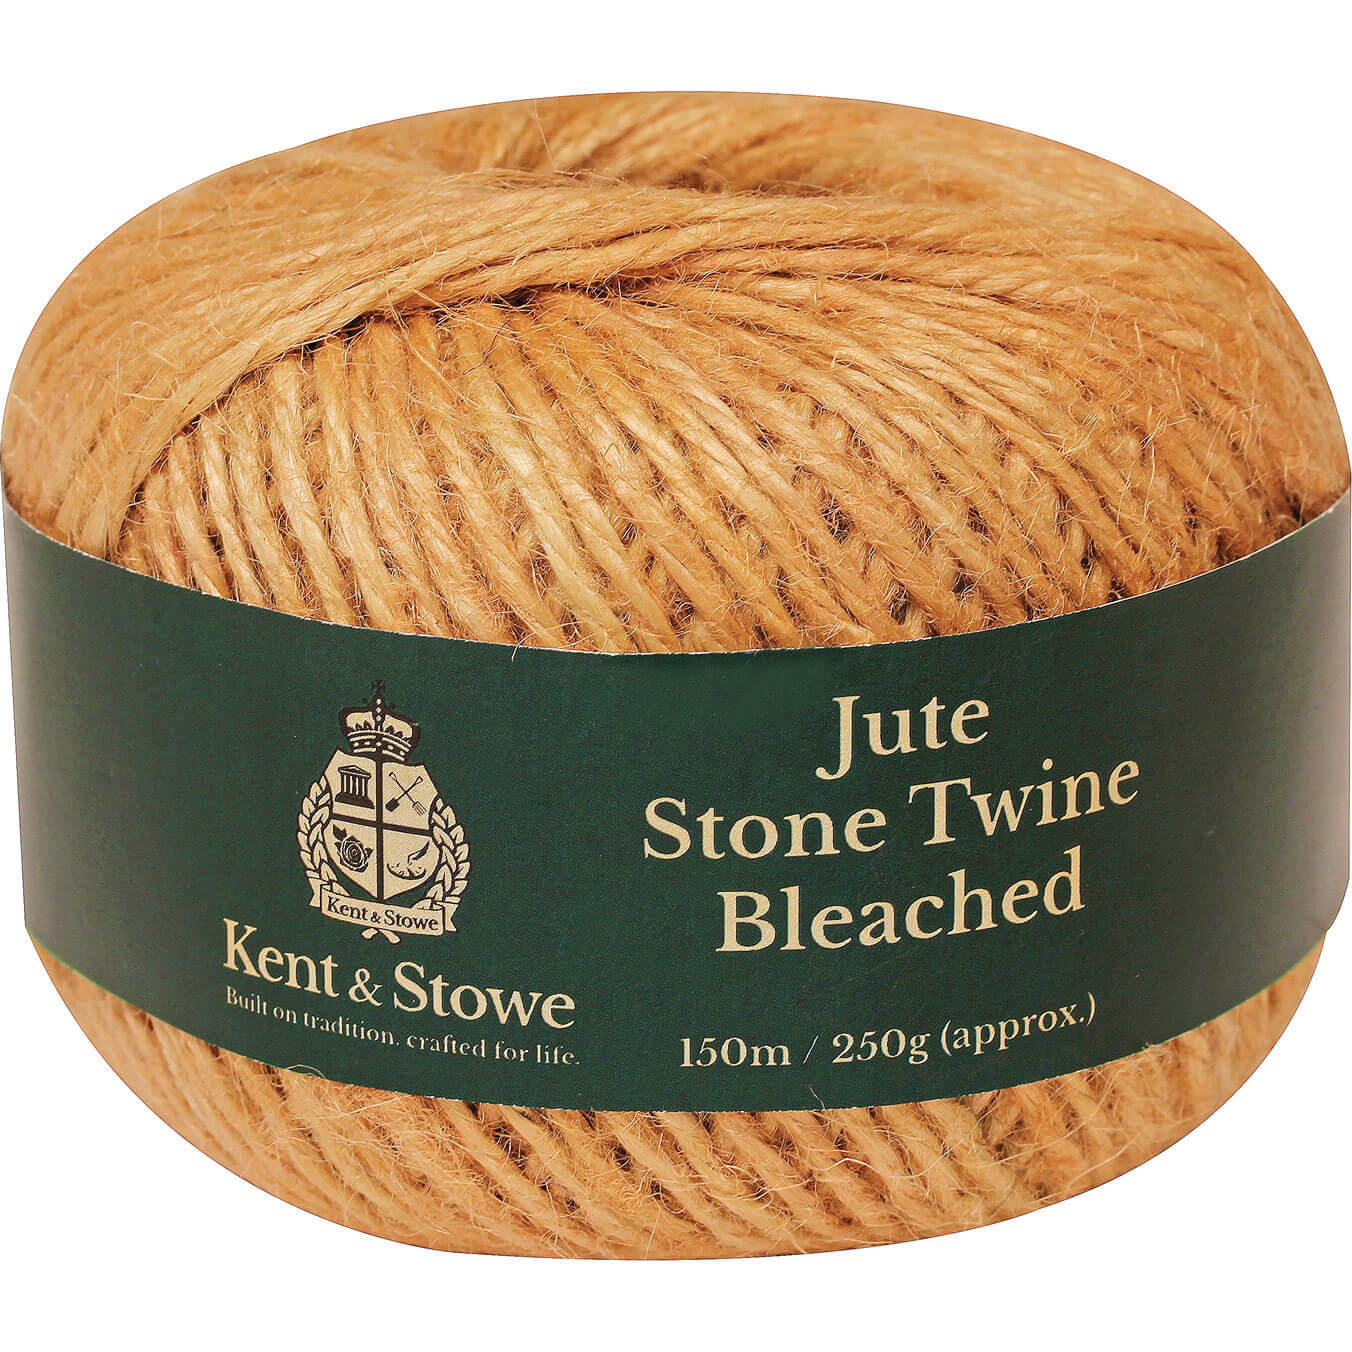 Image of Kent and Stowe Jute Garden Twine Bleached Stone 150m